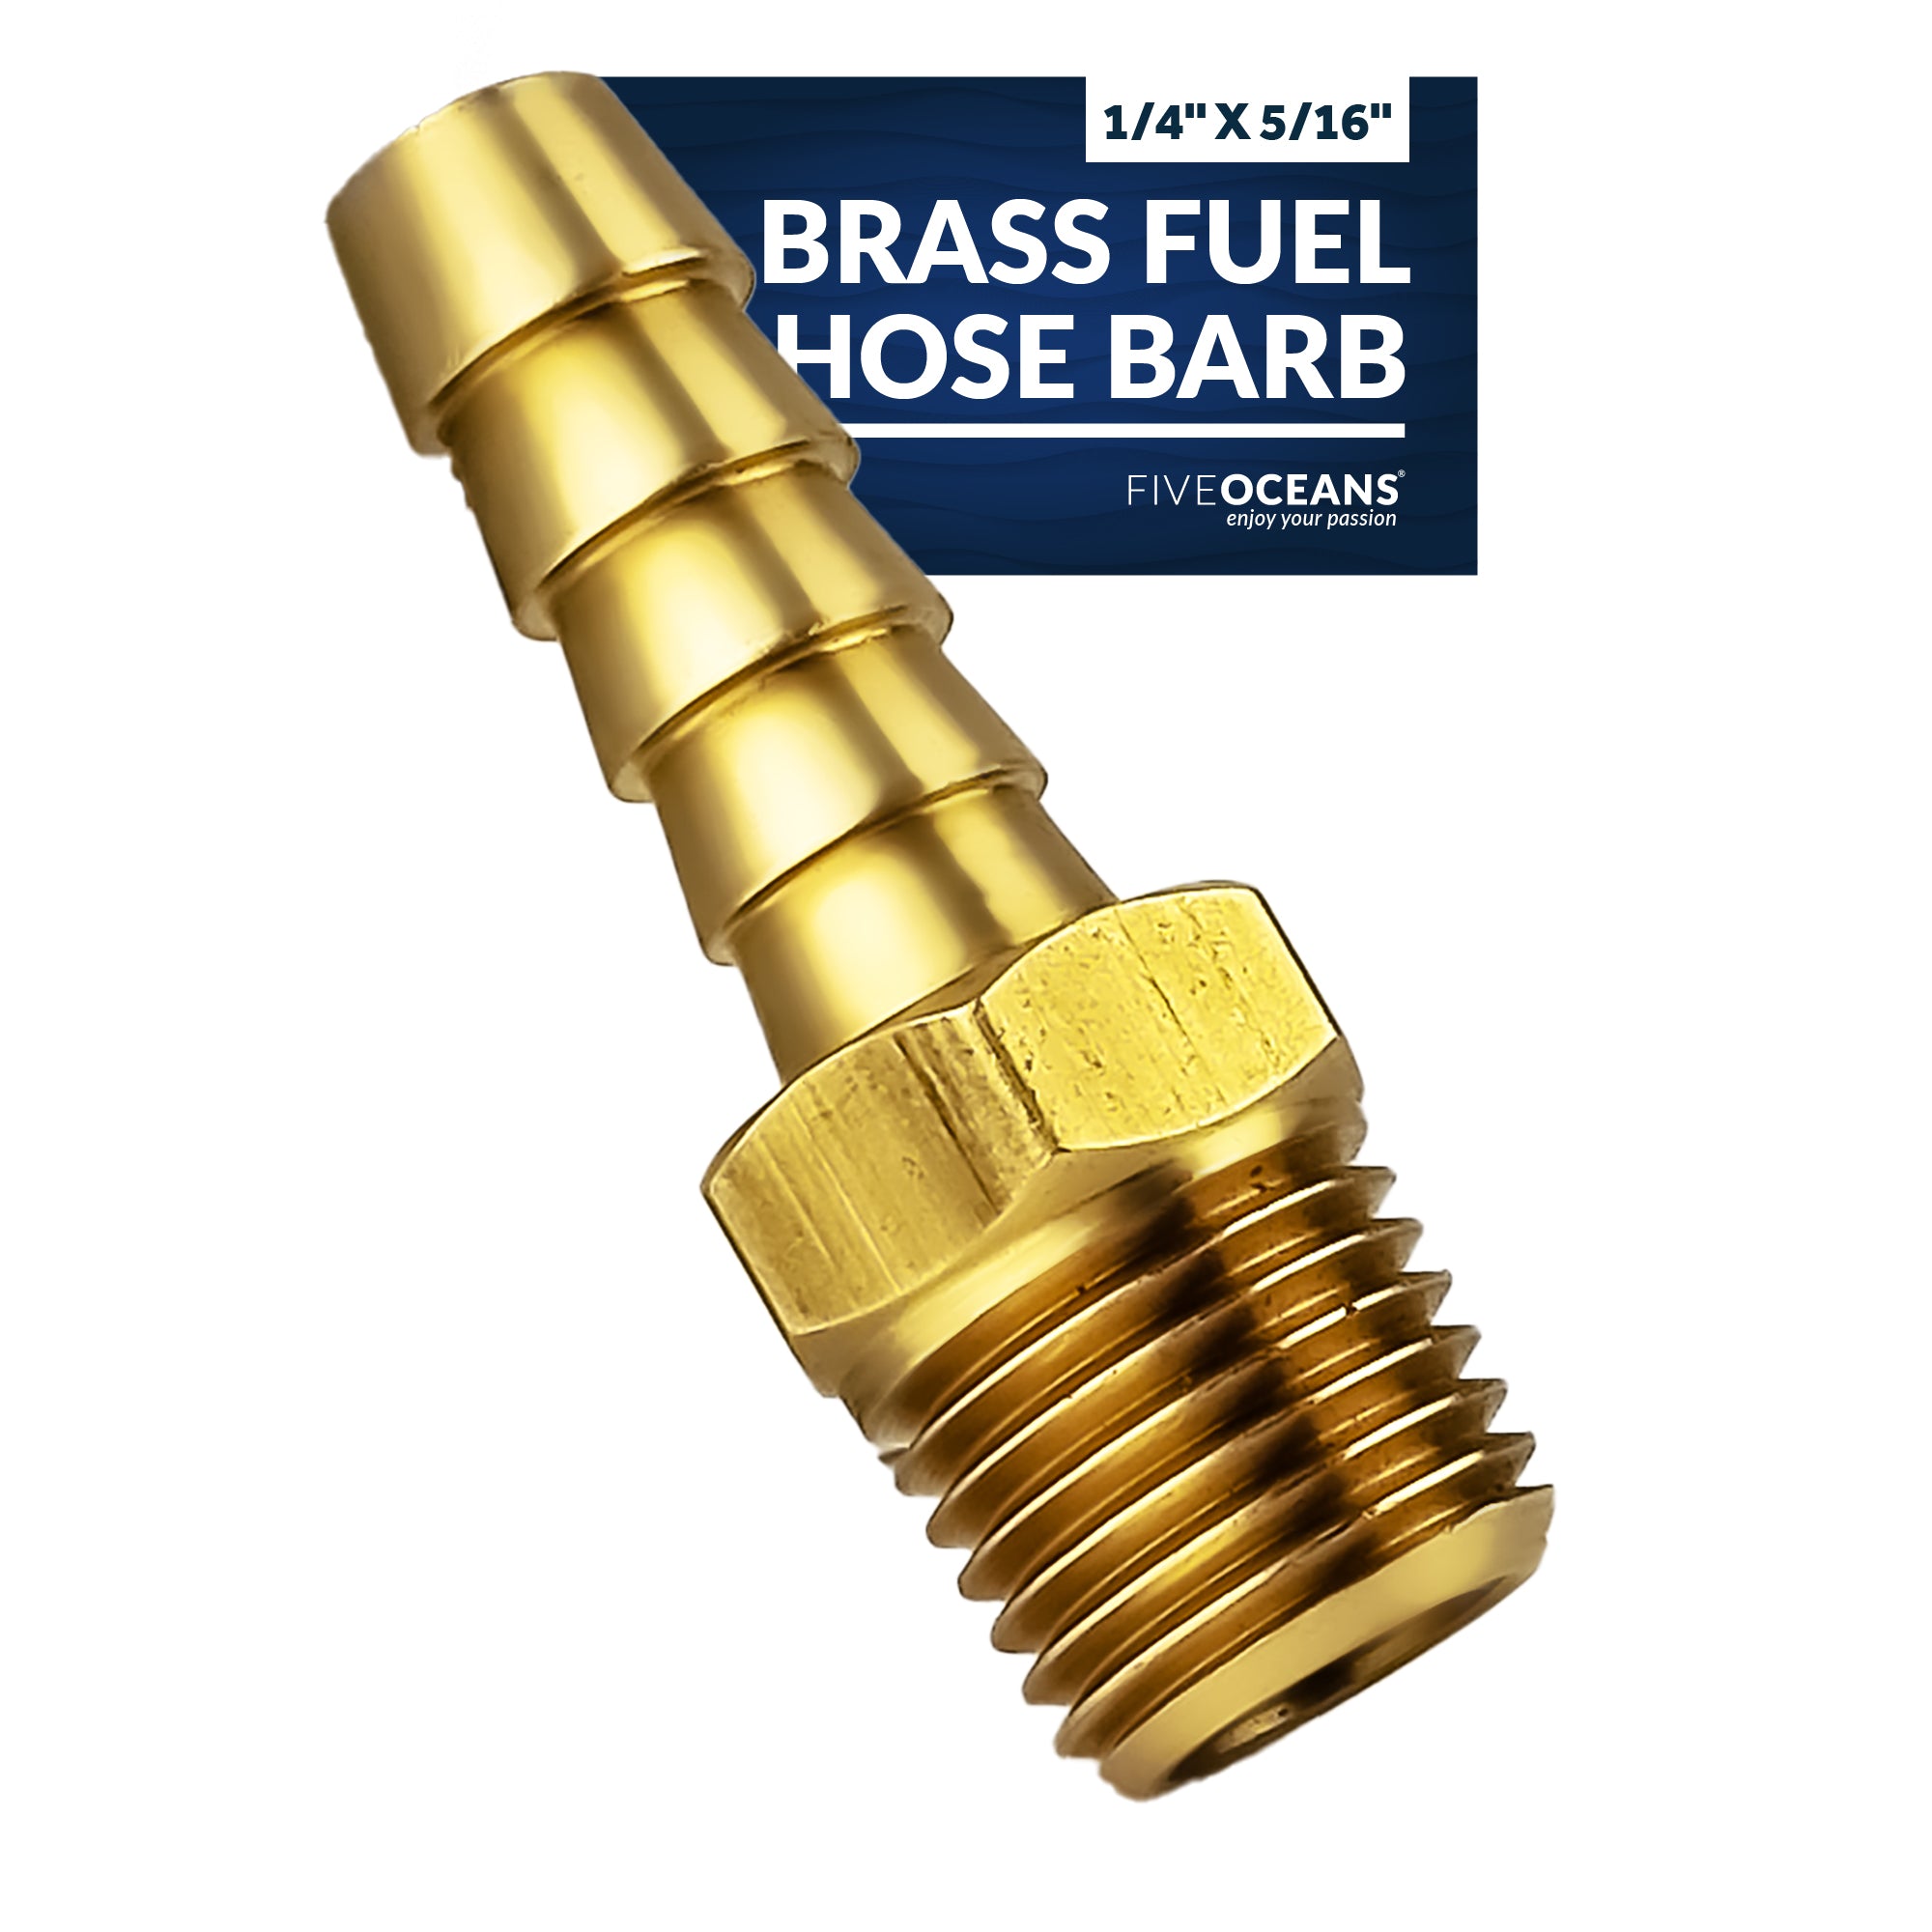 Five Oceans Brass Fuel Hose Barb 1/4 Inches NPT Thread x 5/16 Inches Hose Fo-4278